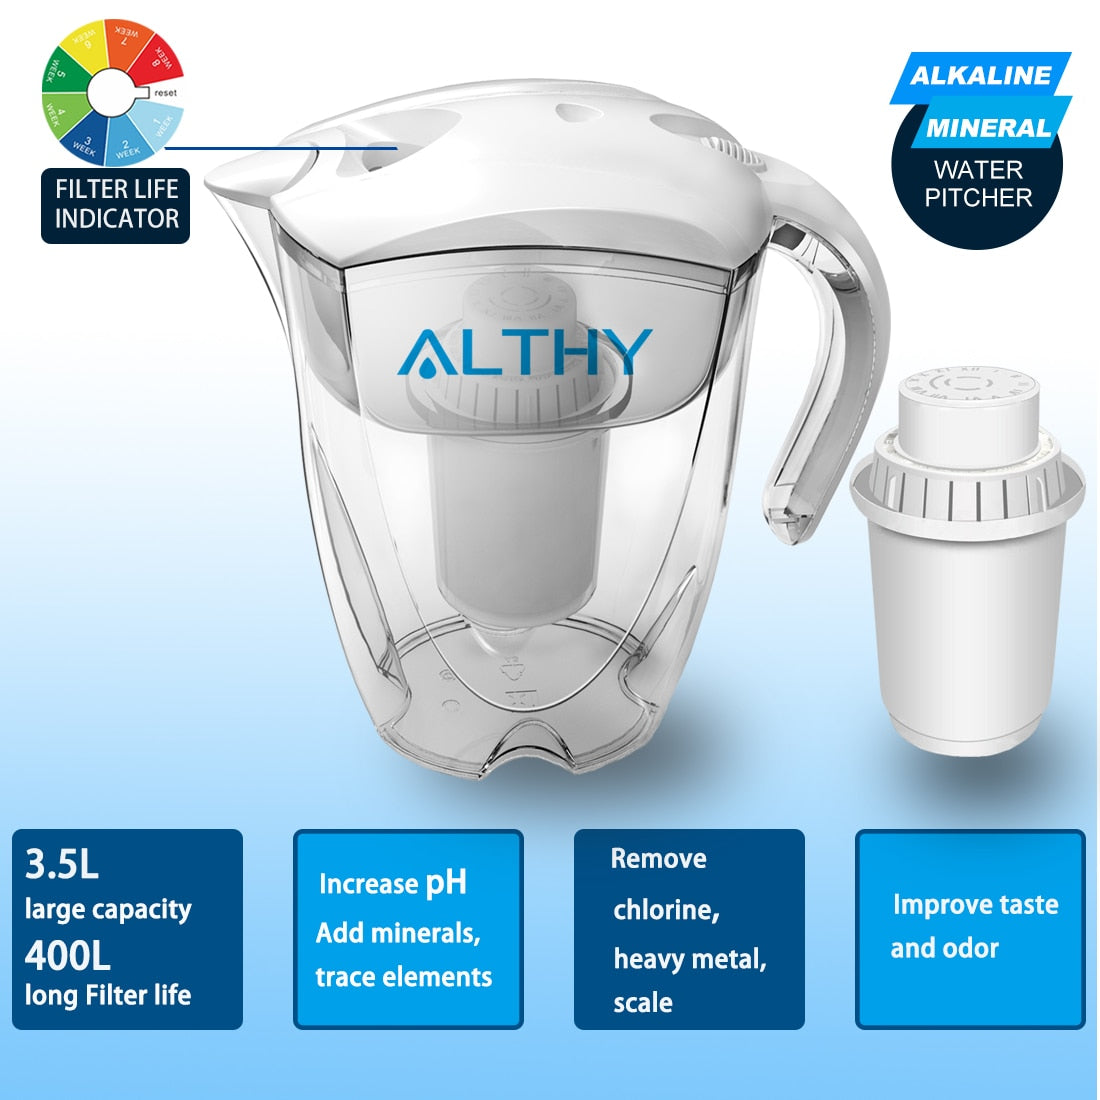 ALTHY 3.5L Mineral Alkaline Water Pitcher Filter - 400L Long-Life Filters - Alkalizer Purifier Filtration System +pH -ORP  Hardware > Plumbing > Water Dispensing & Filtration 115.16 EZYSELLA SHOP